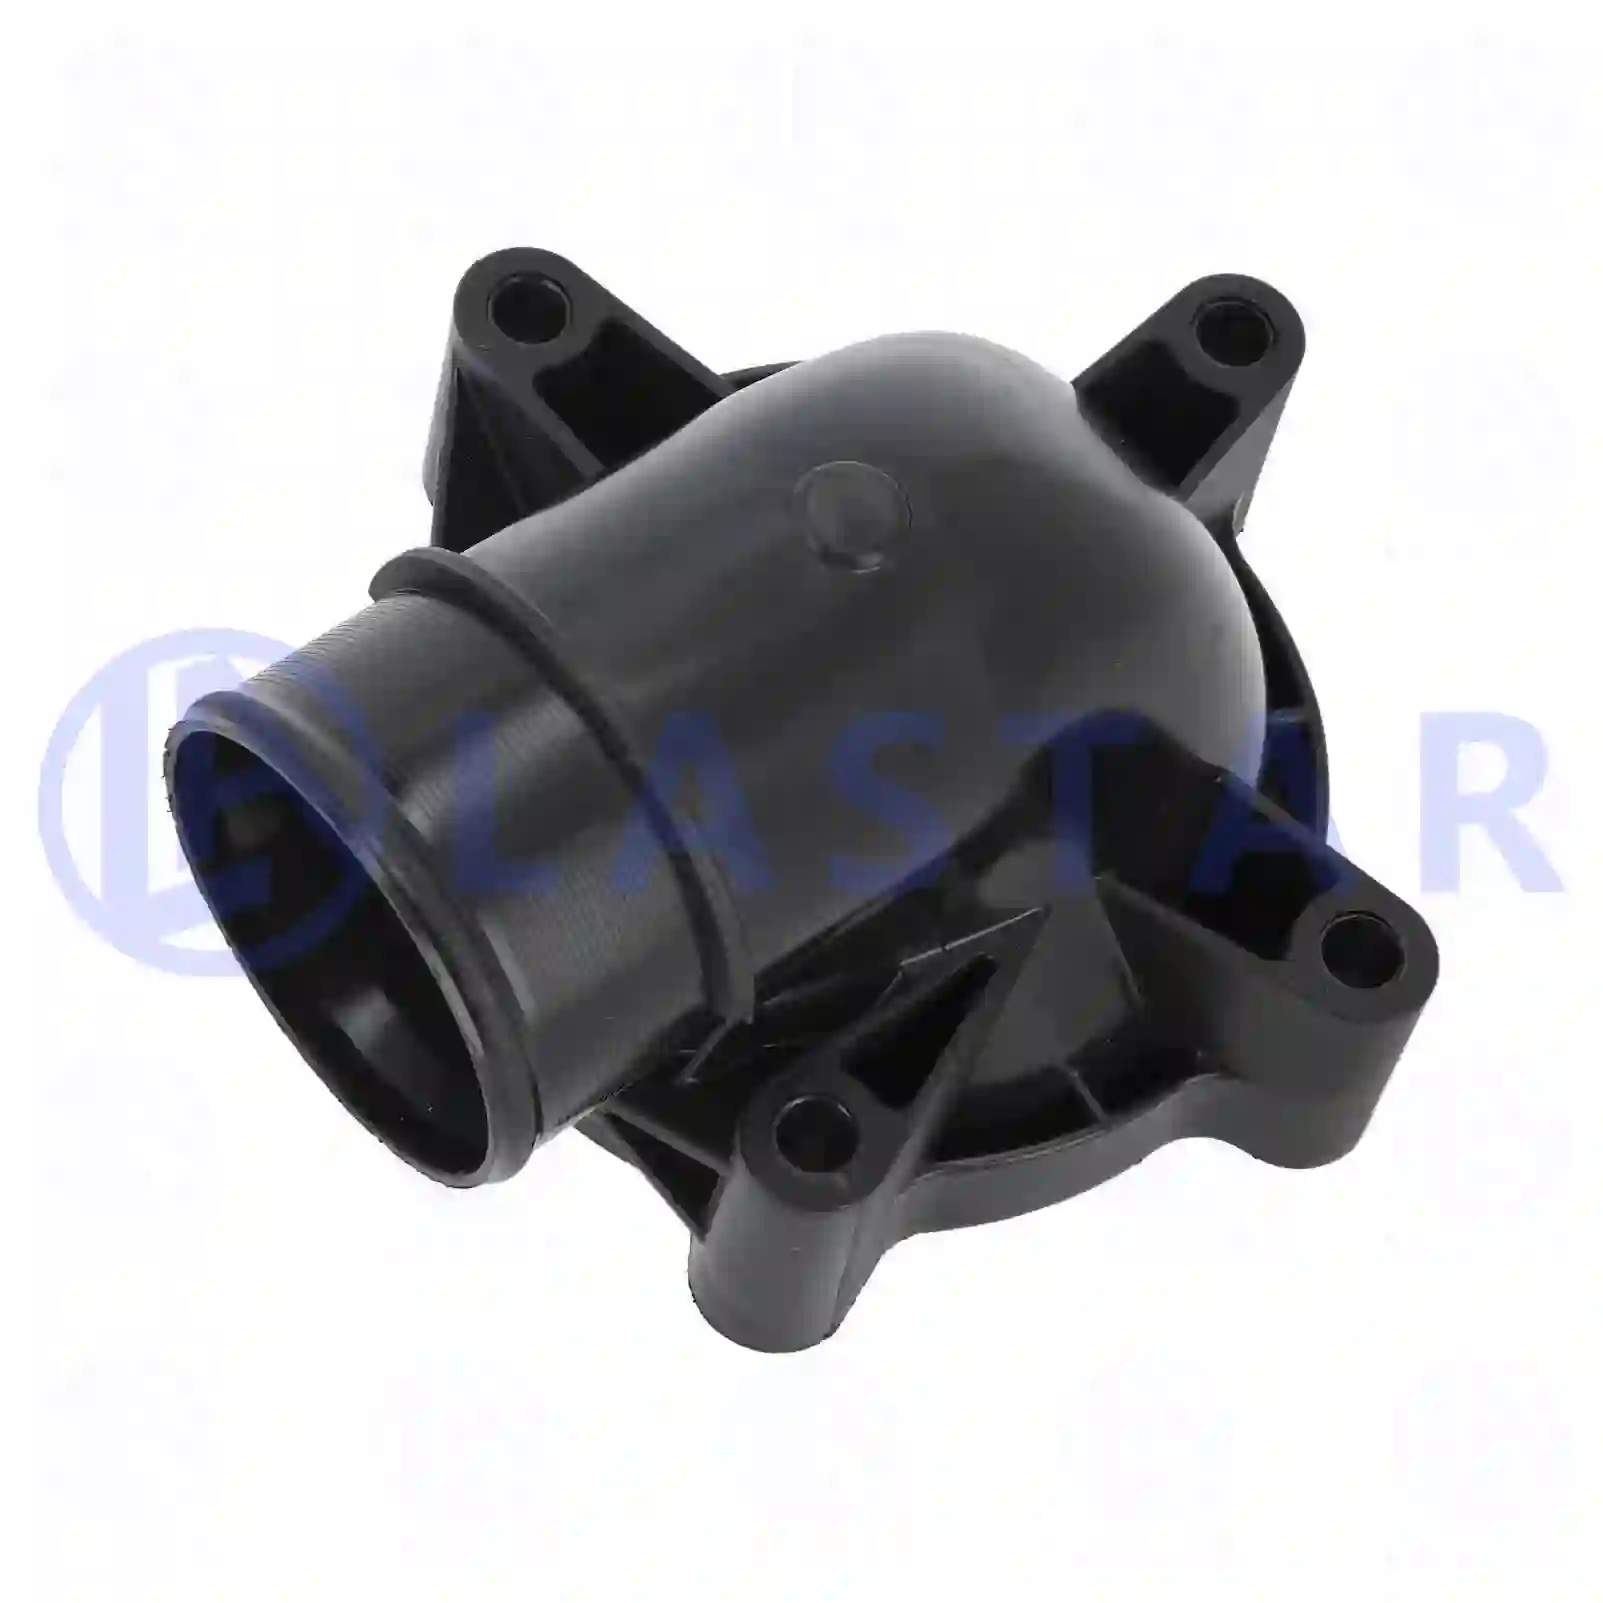 Thermostat housing, 77709457, 7420405125, 7421861948, 7421905526, 20405125, 21519562, 21611266, 21861948, 21905526 ||  77709457 Lastar Spare Part | Truck Spare Parts, Auotomotive Spare Parts Thermostat housing, 77709457, 7420405125, 7421861948, 7421905526, 20405125, 21519562, 21611266, 21861948, 21905526 ||  77709457 Lastar Spare Part | Truck Spare Parts, Auotomotive Spare Parts